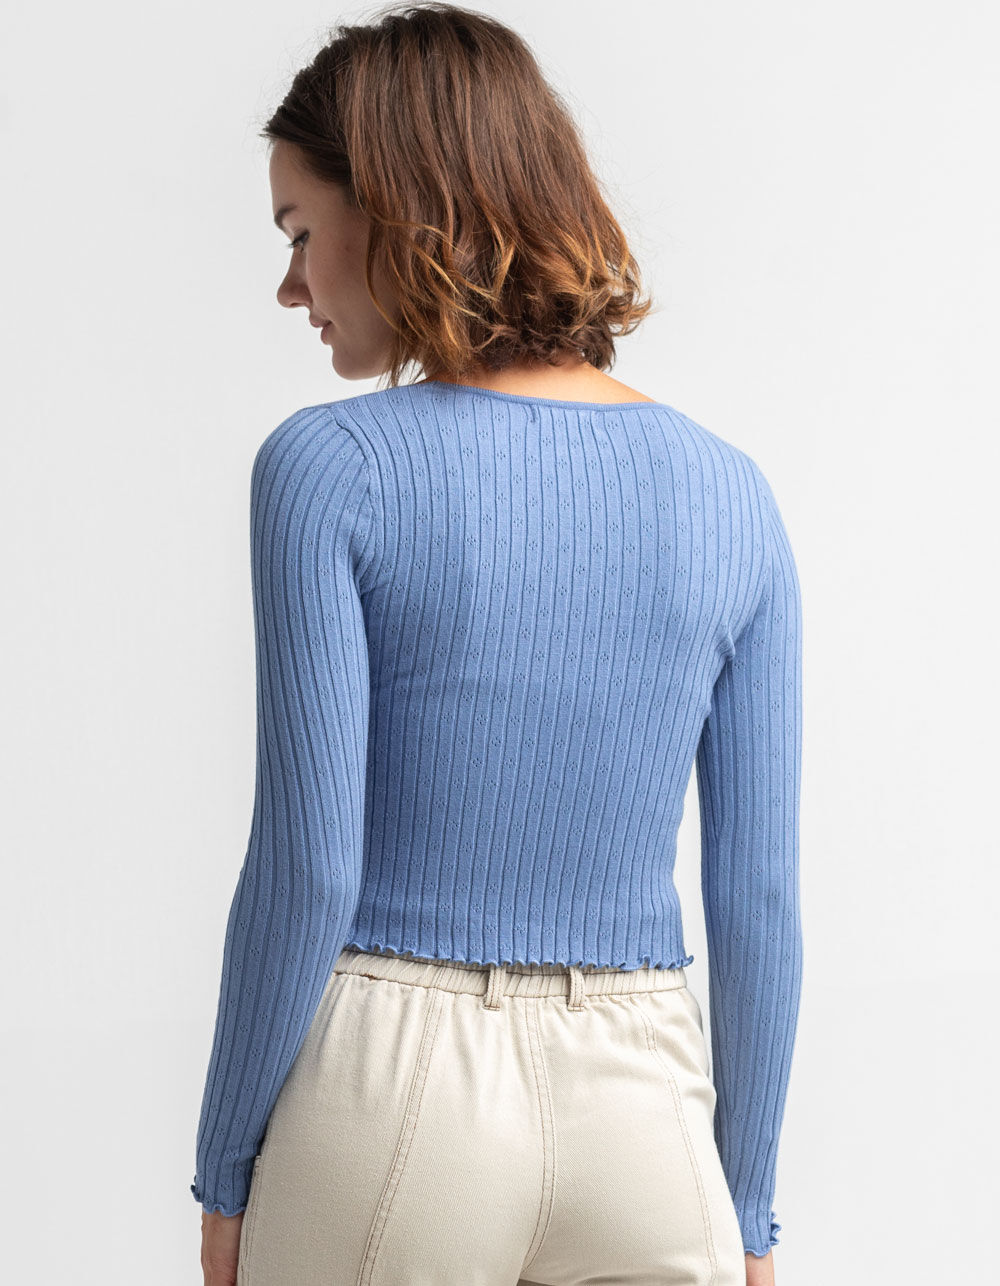 SKY AND SPARROW Tie Front Womens Blue Pointelle Cardigan - BLUE | Tillys